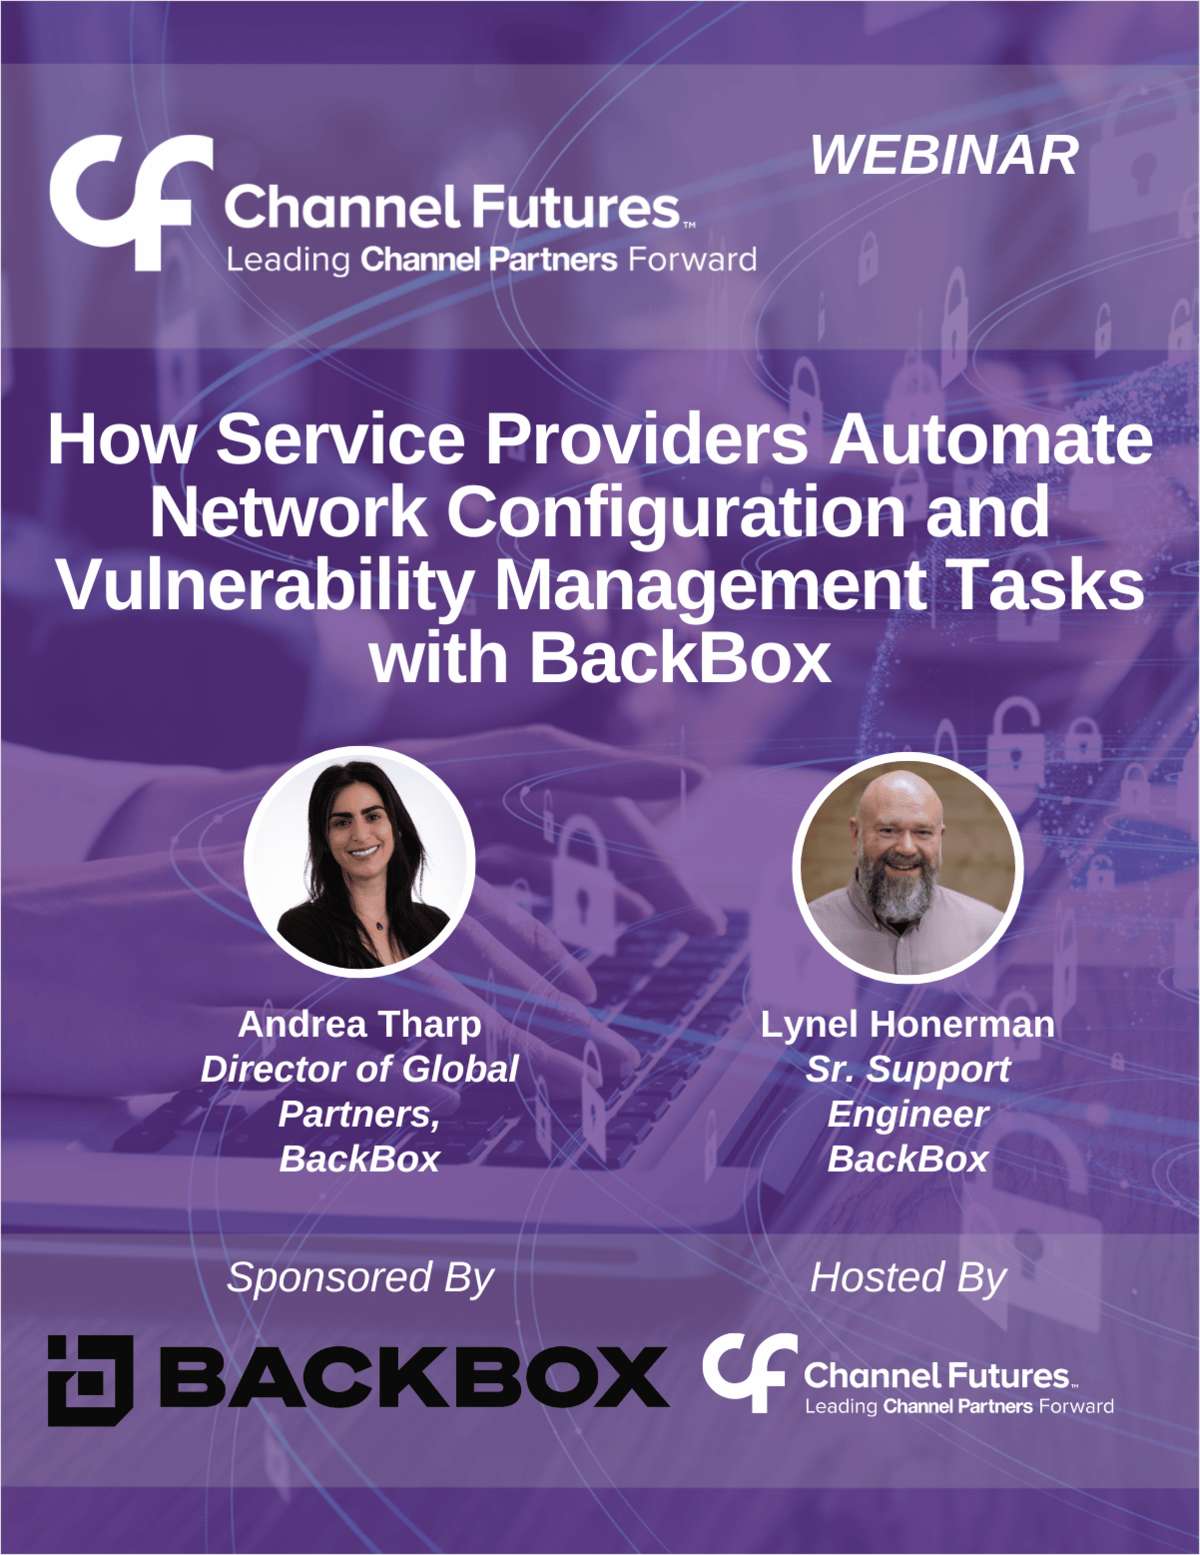 How Service Providers Automate Network Configuration and Vulnerability Management Tasks with BackBox